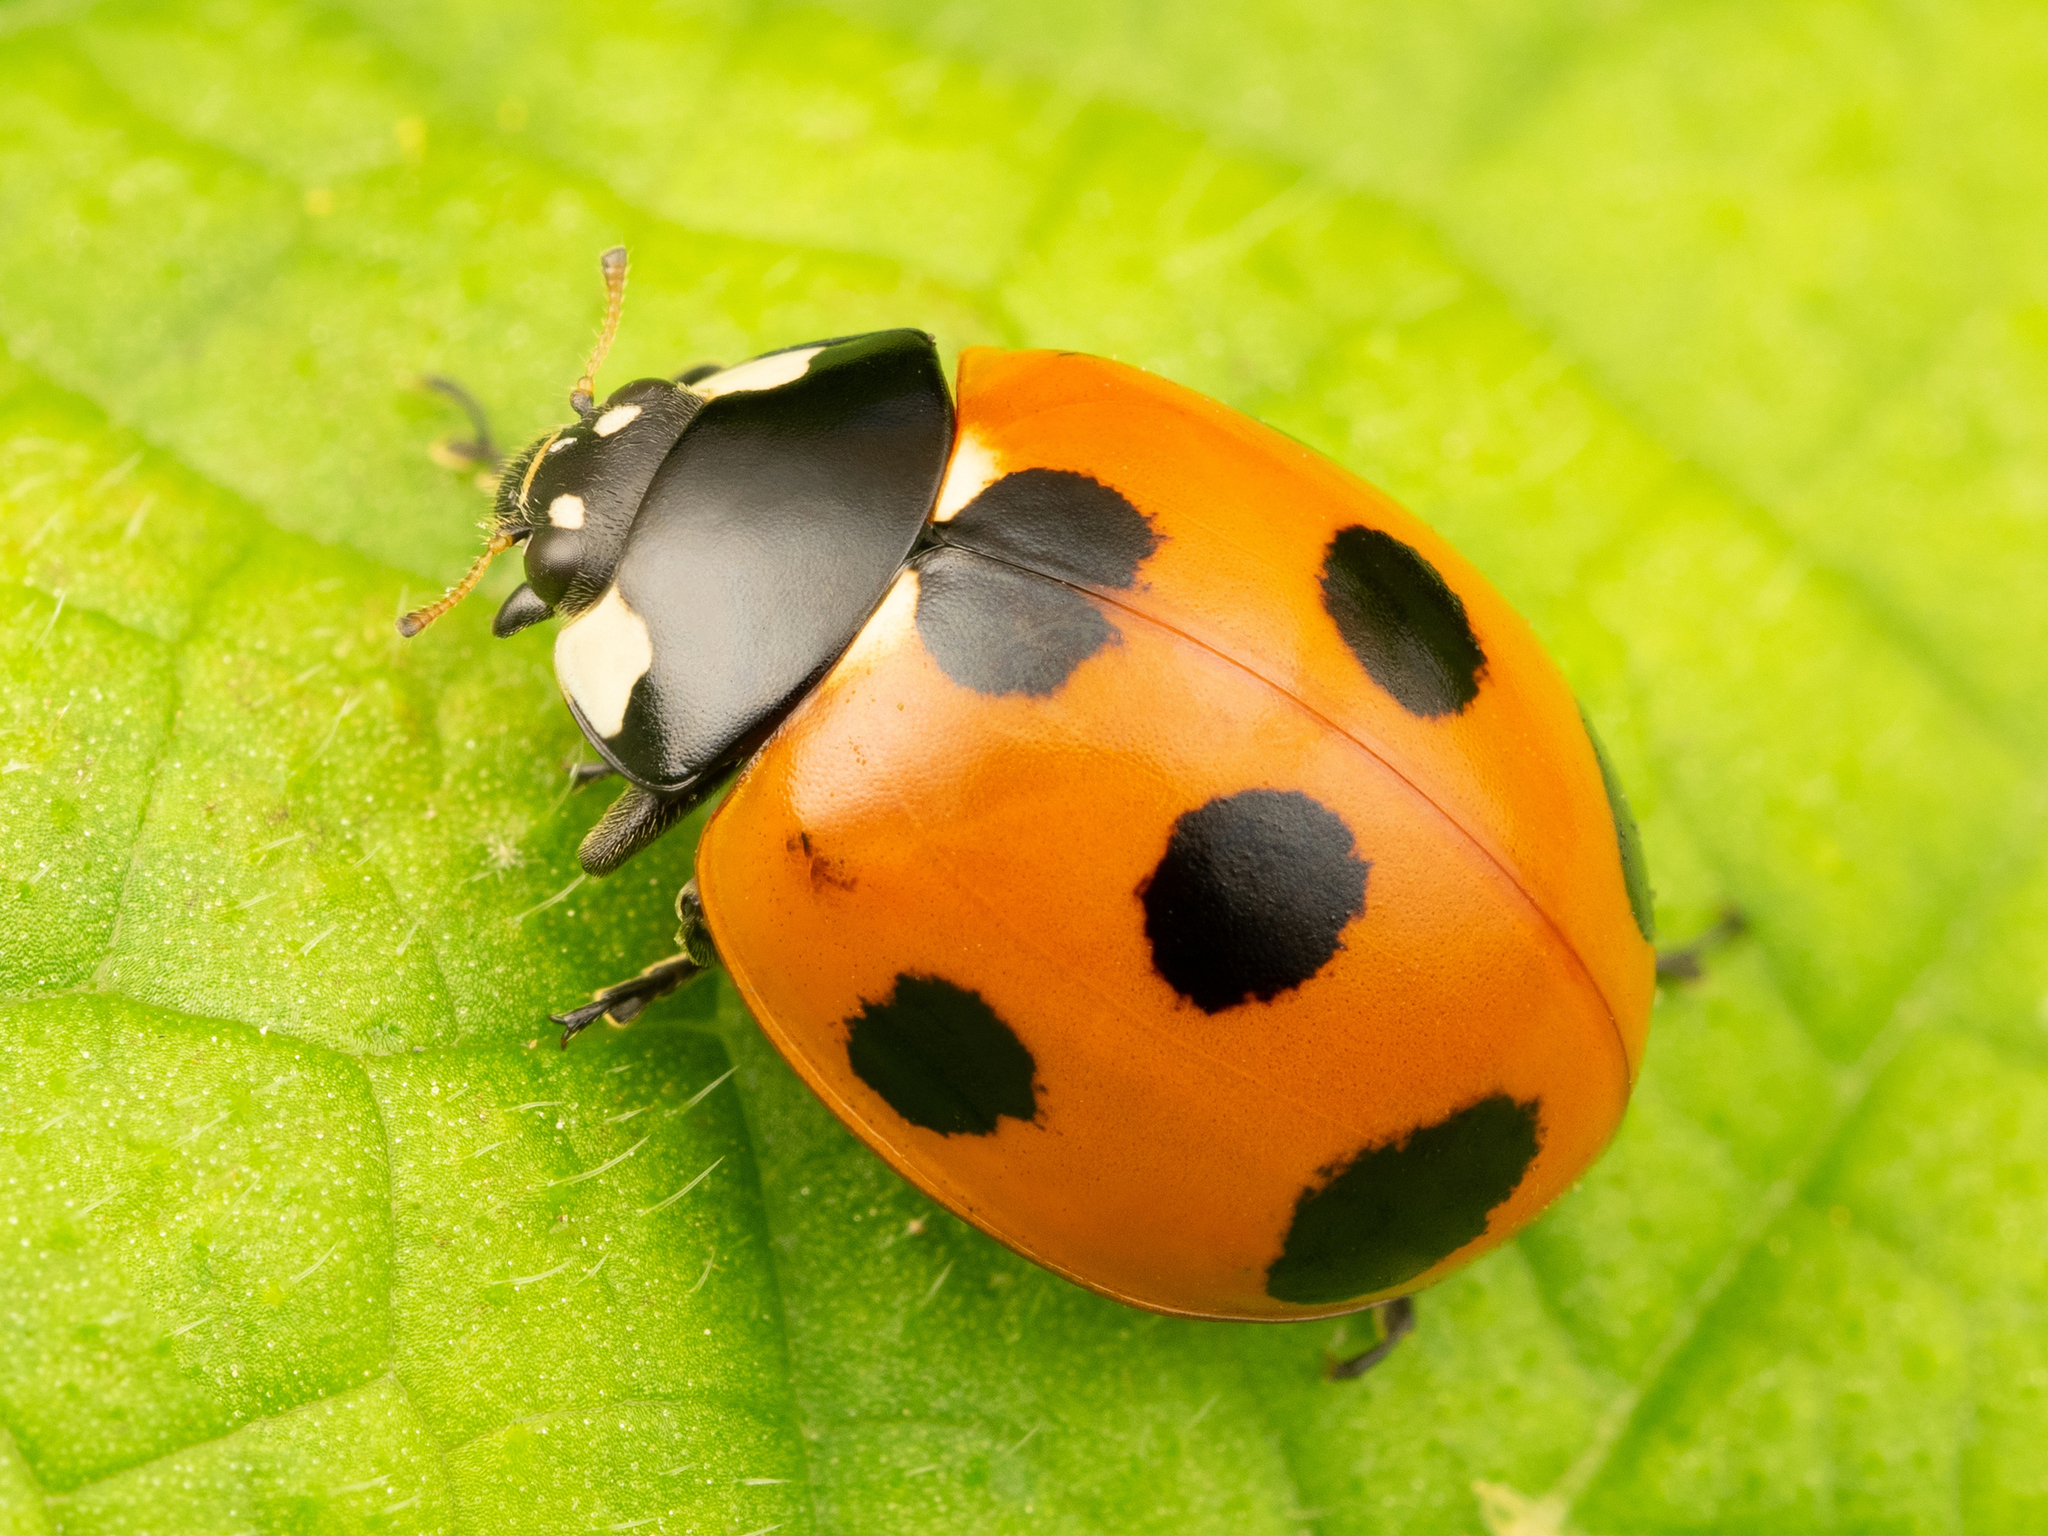 coccinellidae